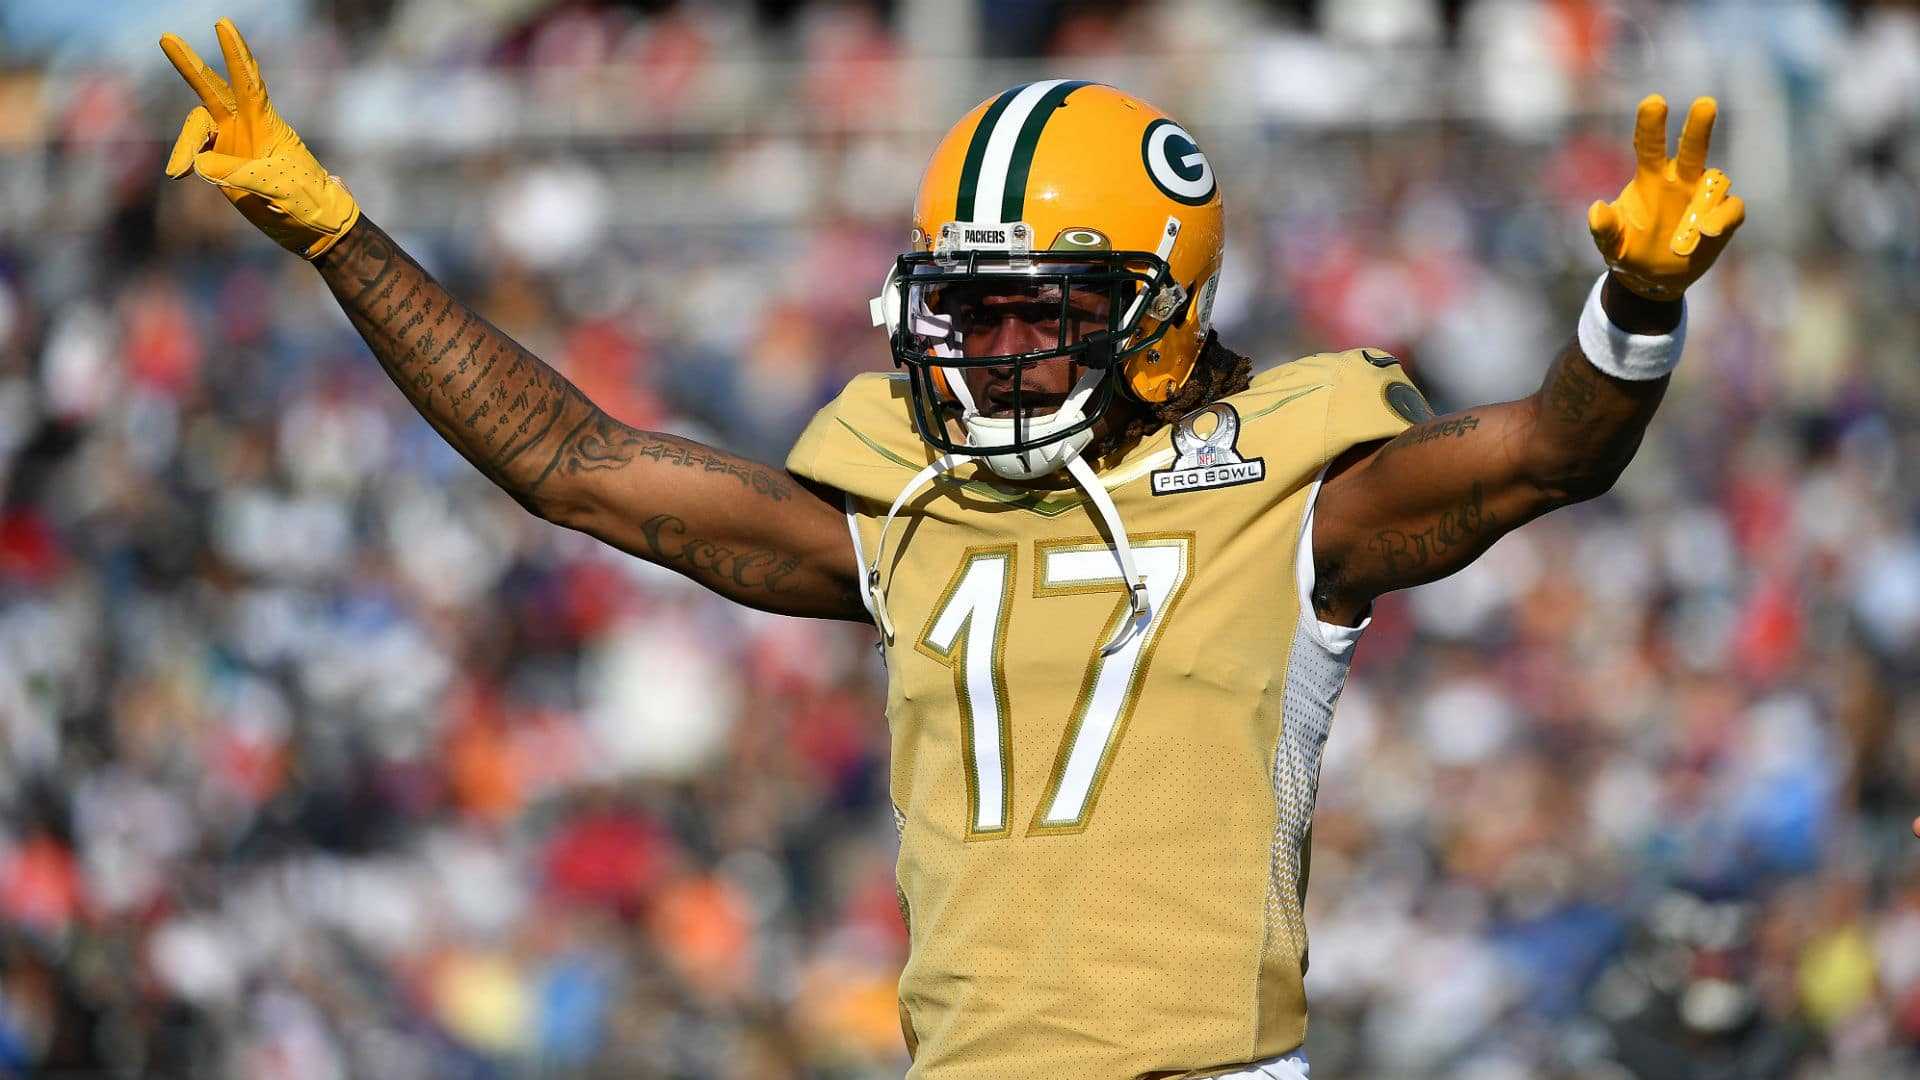 Is Packers WR Davante Adams indeed the best receiver in the NFL?